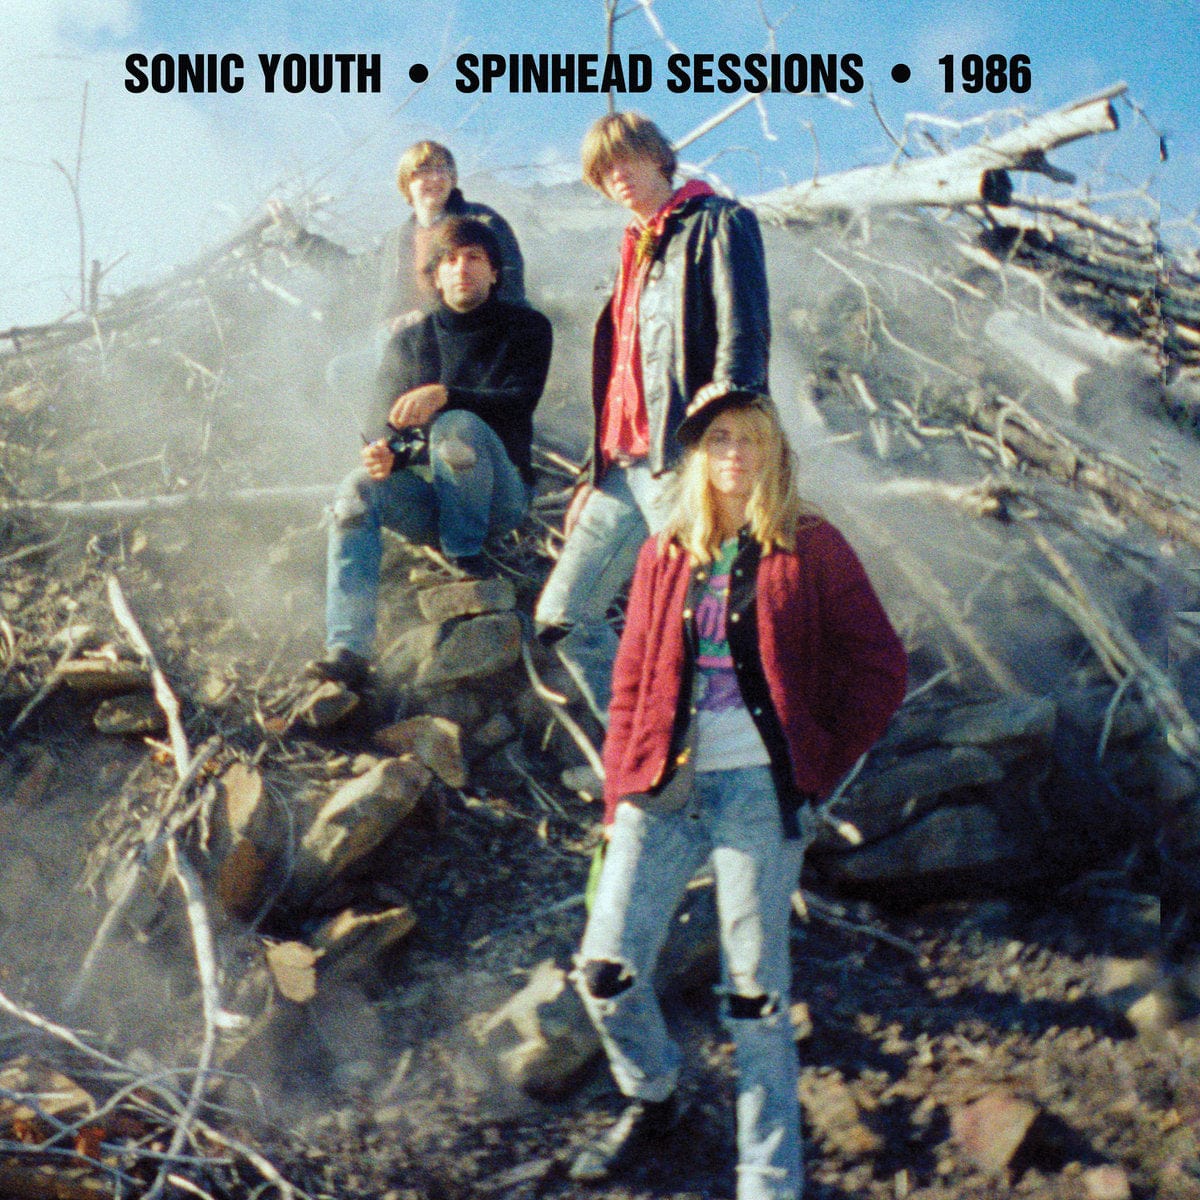 Goofin' Records CD Sonic Youth "Spinhead Sessions" CD